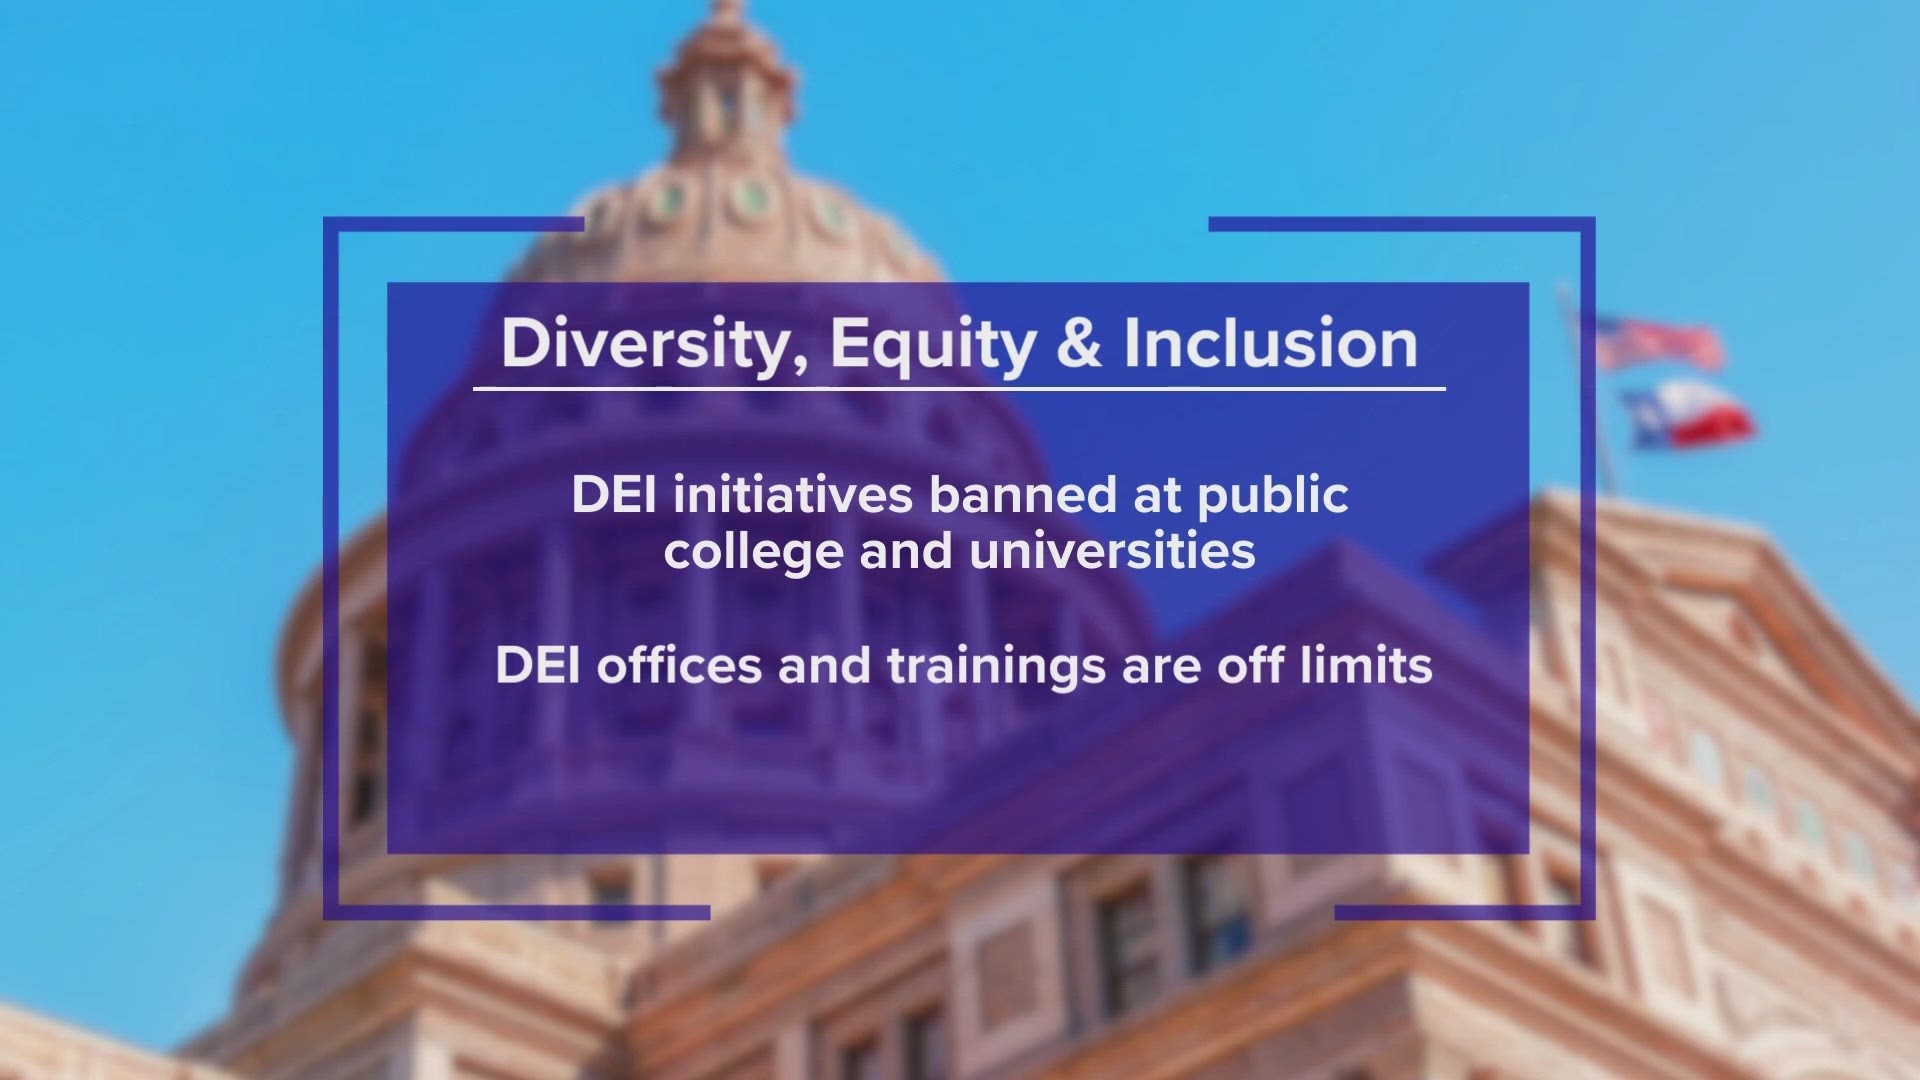 On January 1, 2024, public universities and colleges will no longer be allowed to have diversity, equity, and inclusion offices.